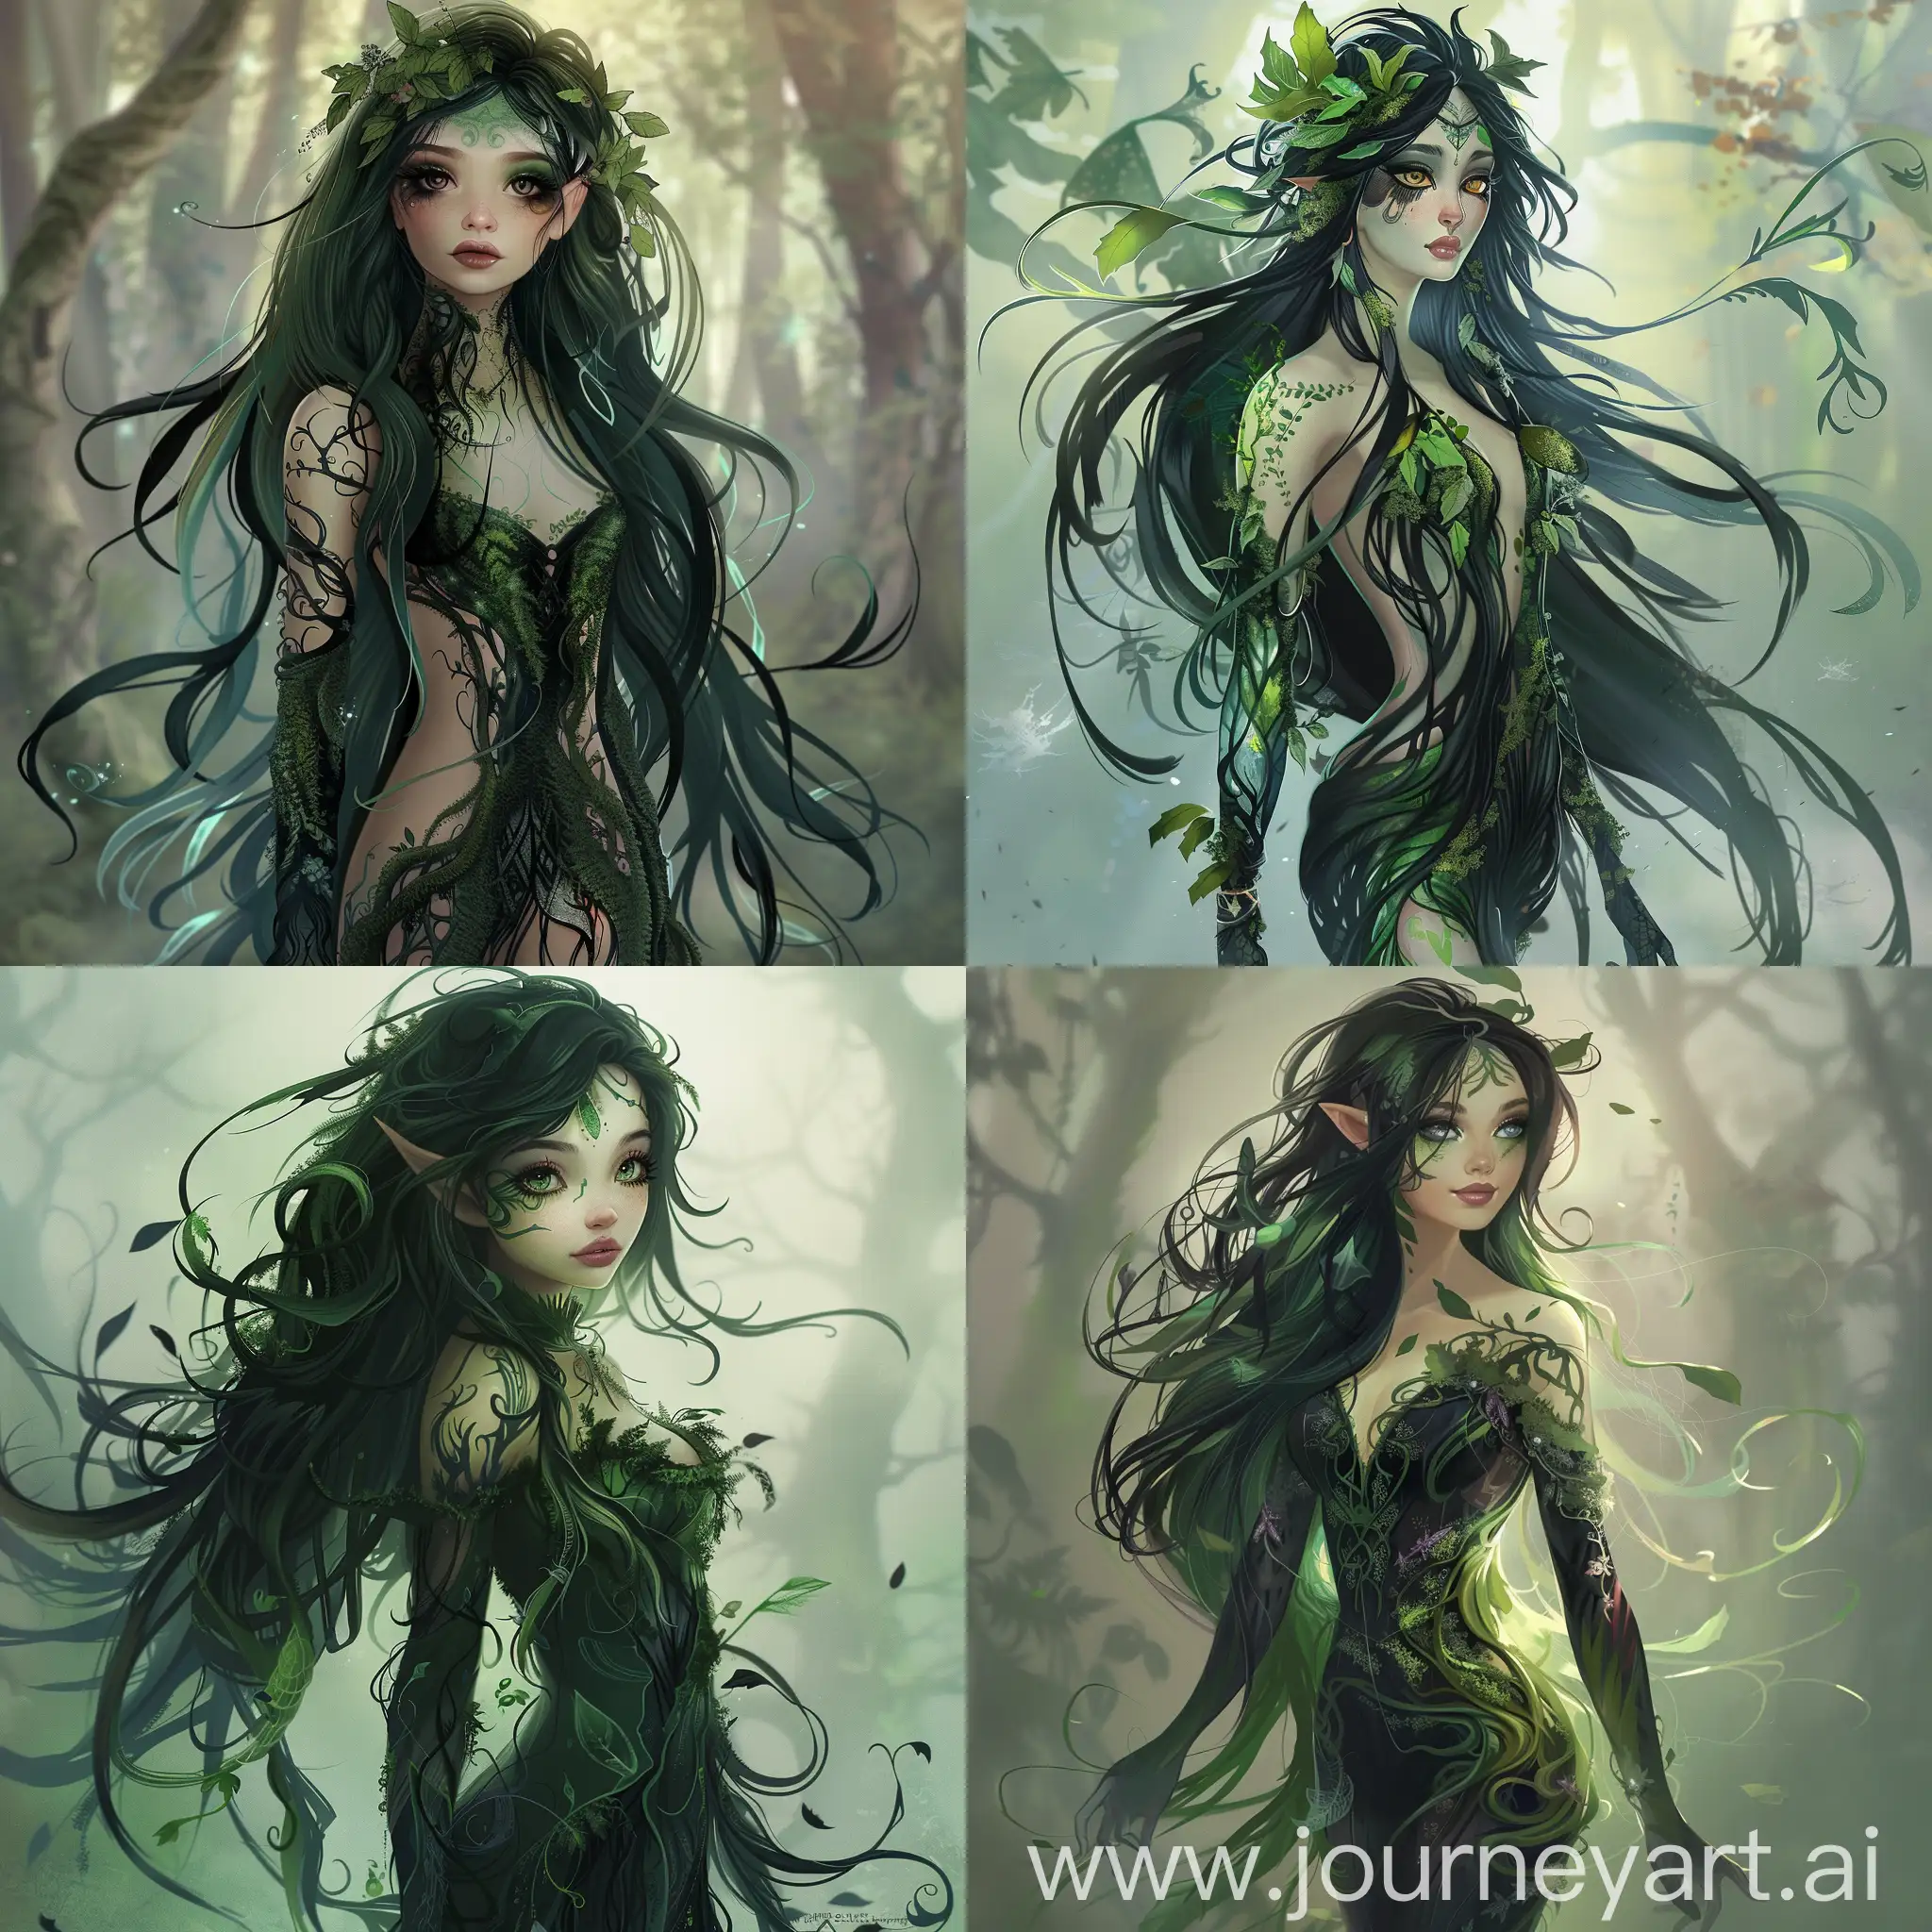 User
Create an image of a woodland spirit that blends a cartoony style with realistic elements, embodying the essence of an enchanted forest with a gothic aesthetic. This spirit is both ethereal and inviting, merging the whimsical charm of cartoon design with the detailed, lifelike textures of realism. Her appearance includes long, flowing hair with deep green and black hues that resemble leaves and vines, emphasizing her connection to the forest. Her skin has a soft glow, adorned with nature-inspired tattoos that add an element of mystical depth. Her eyes are large and expressive, capturing the viewer with their mystical gleam. She wears an outfit that is a fantastical fusion of forest elements—leaves, moss, and flowers—crafted to accentuate her playful yet elegant silhouette. Around her, a subtle aura of forest magic prevails, with hints of light and shadow that add to her mysterious allure. As the forest queen's handmaid, she projects a balance of strength, grace, and a protective nature, perfectly blending the boundaries between the cartoony and the realistic.